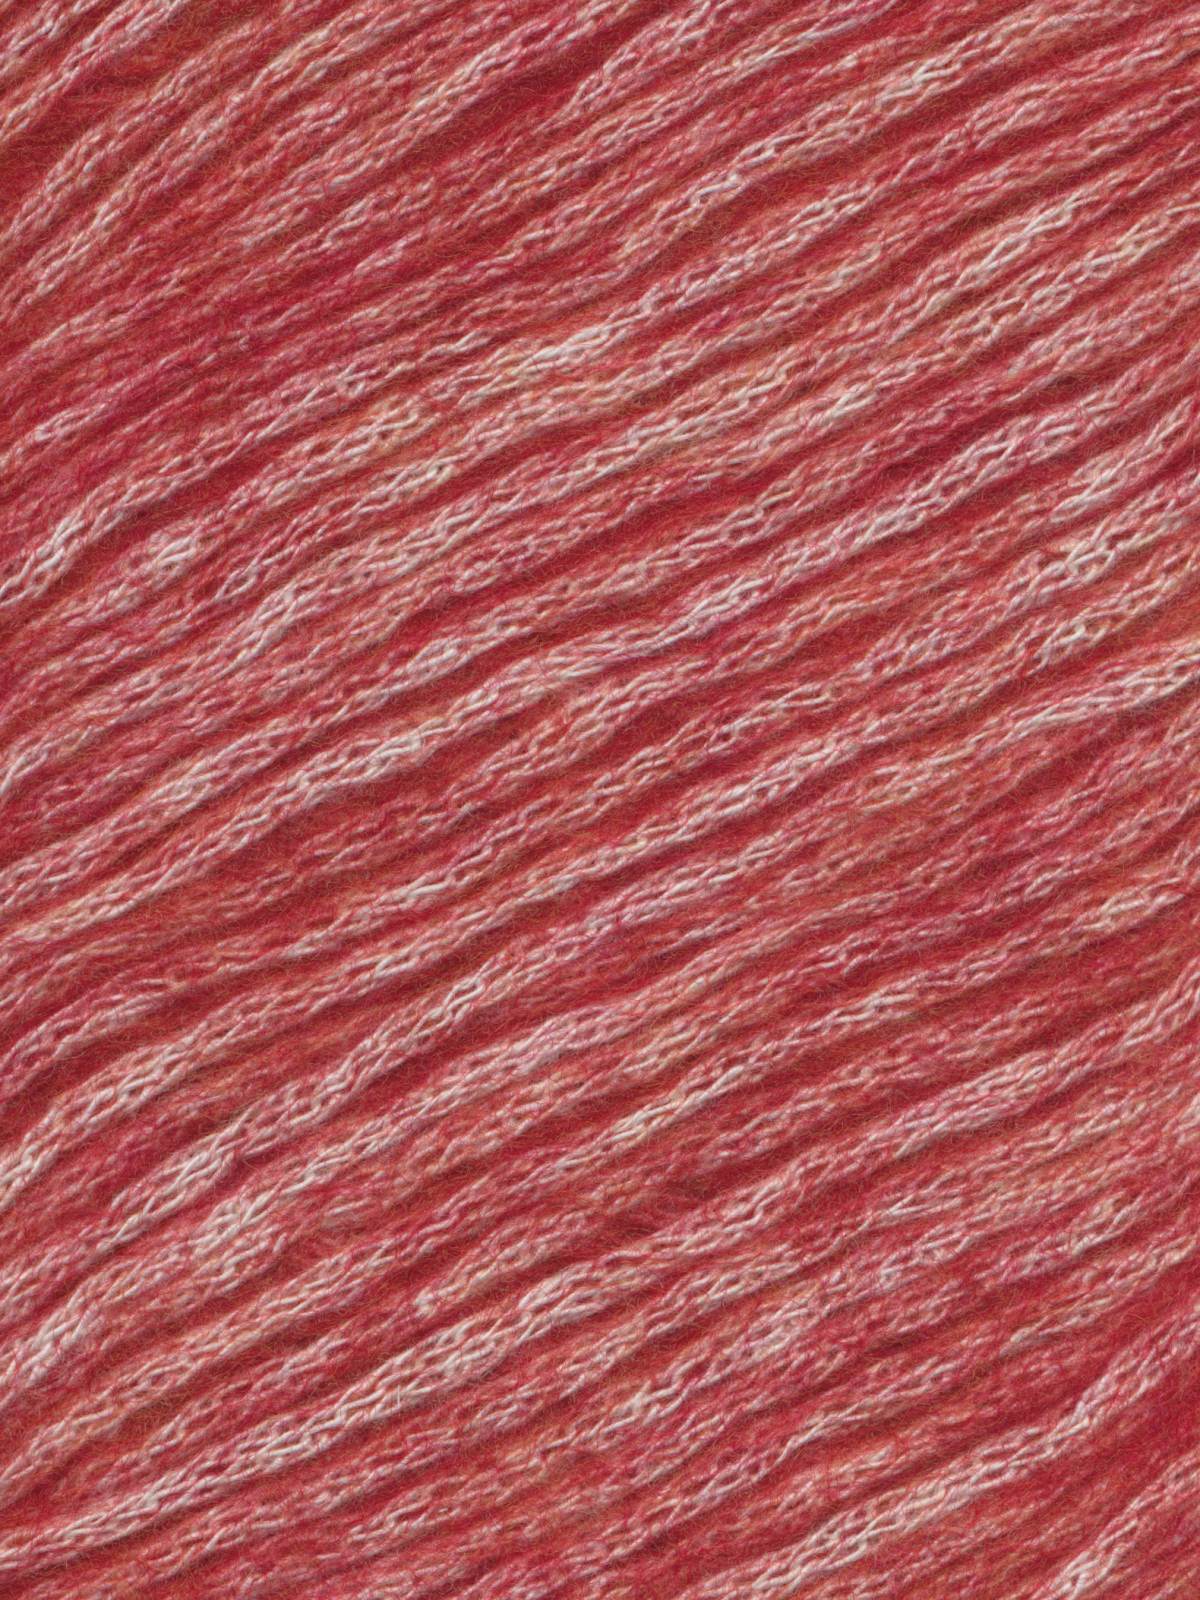 Cotton-Merino Blend Worsted Weight Yarn, Concept by Katia